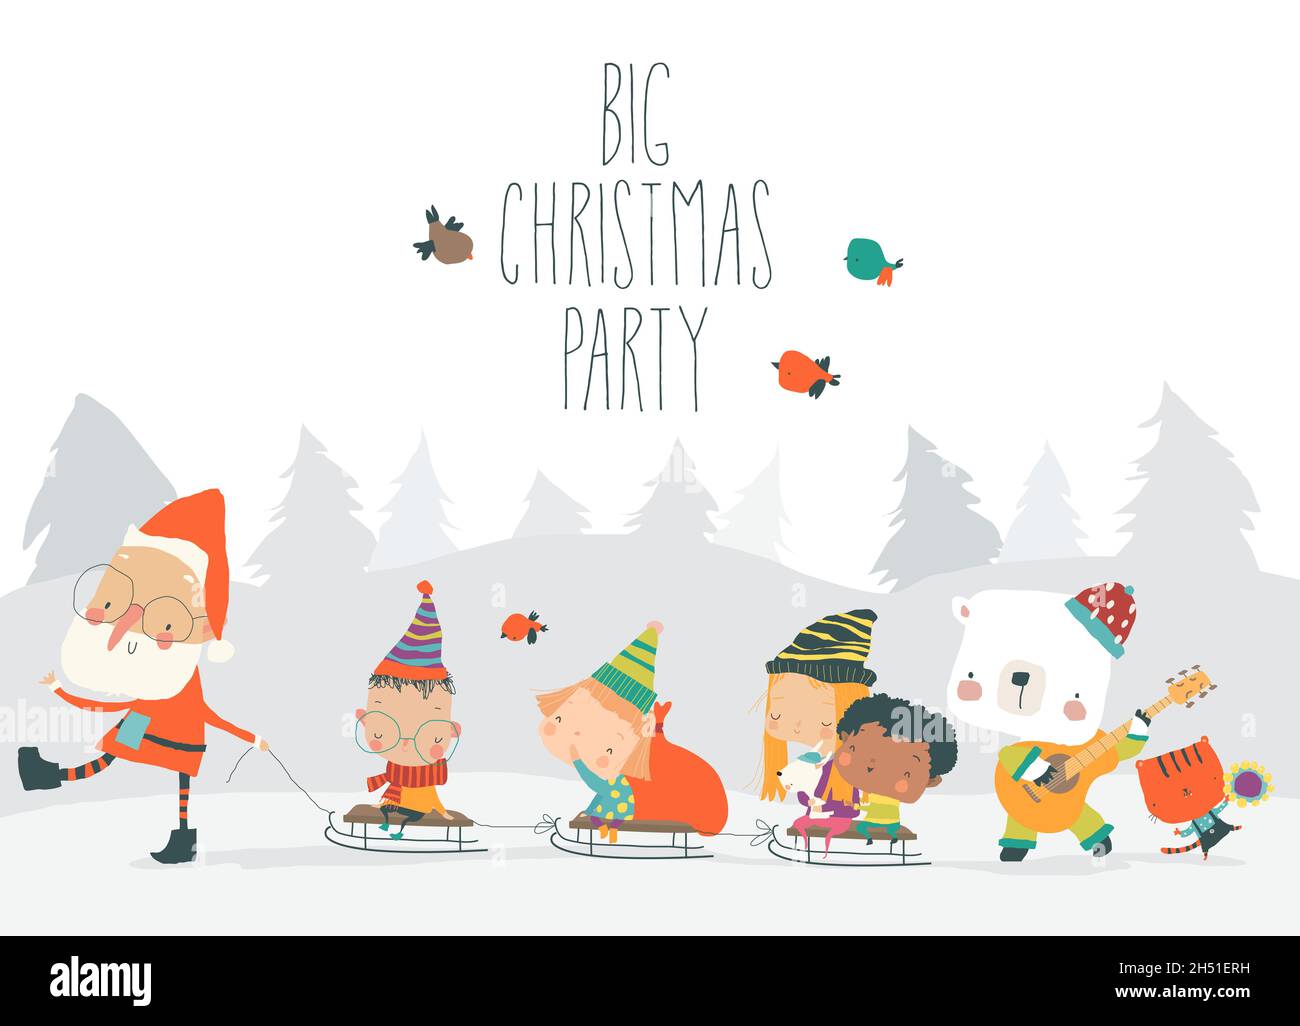 Cartoon Santa Claus going to Big Party with Happy Kids and Animals Stock Vector